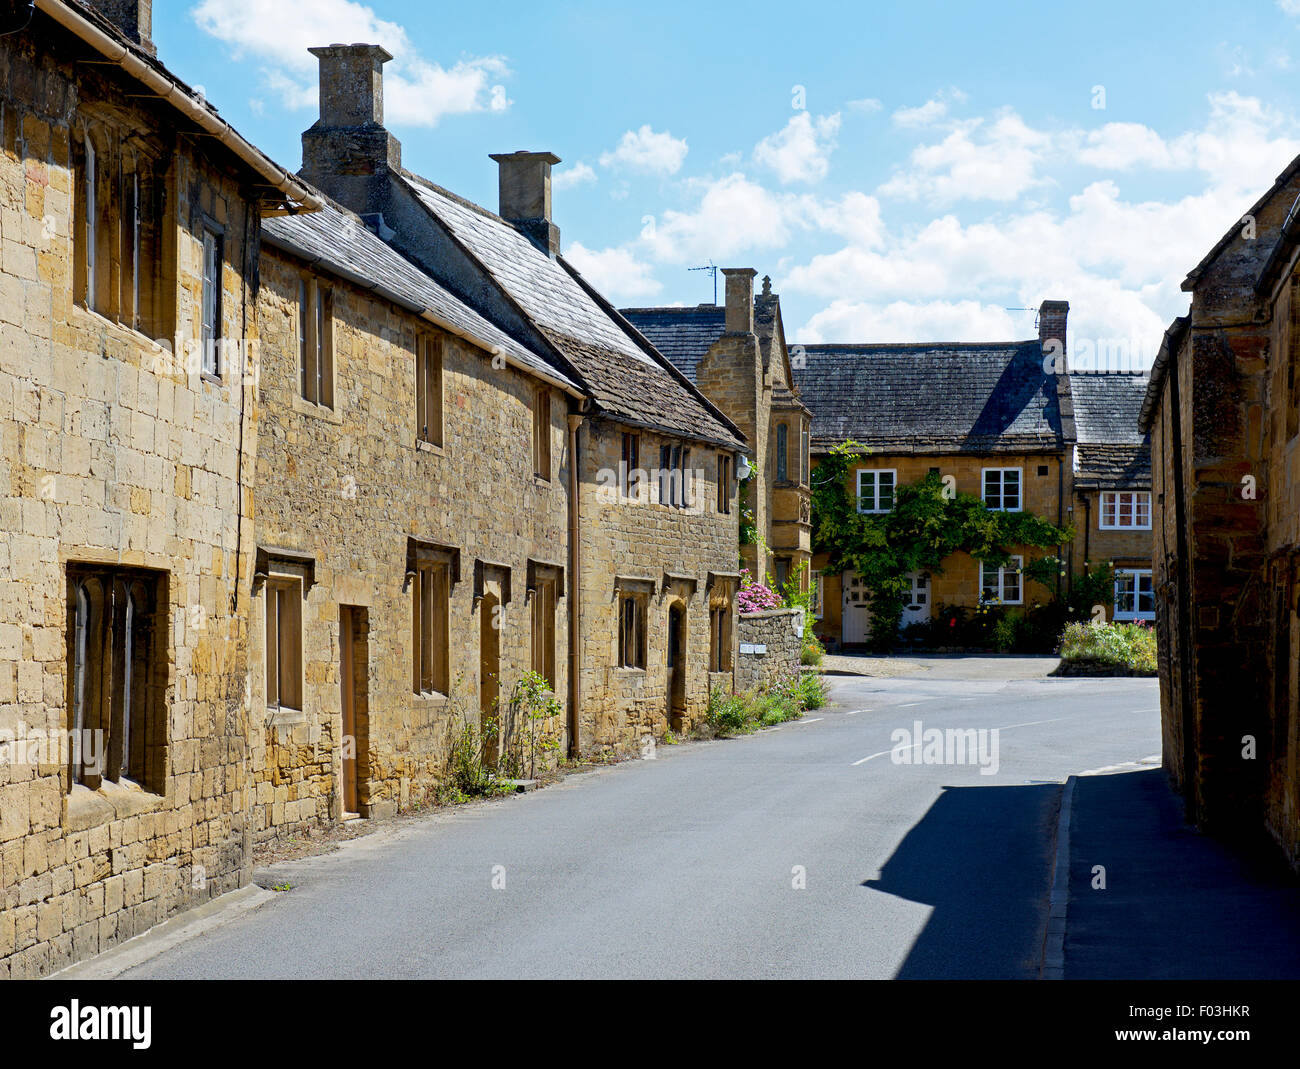 Cottages in the village of Montacute, Somerset, England UK Stock Photo